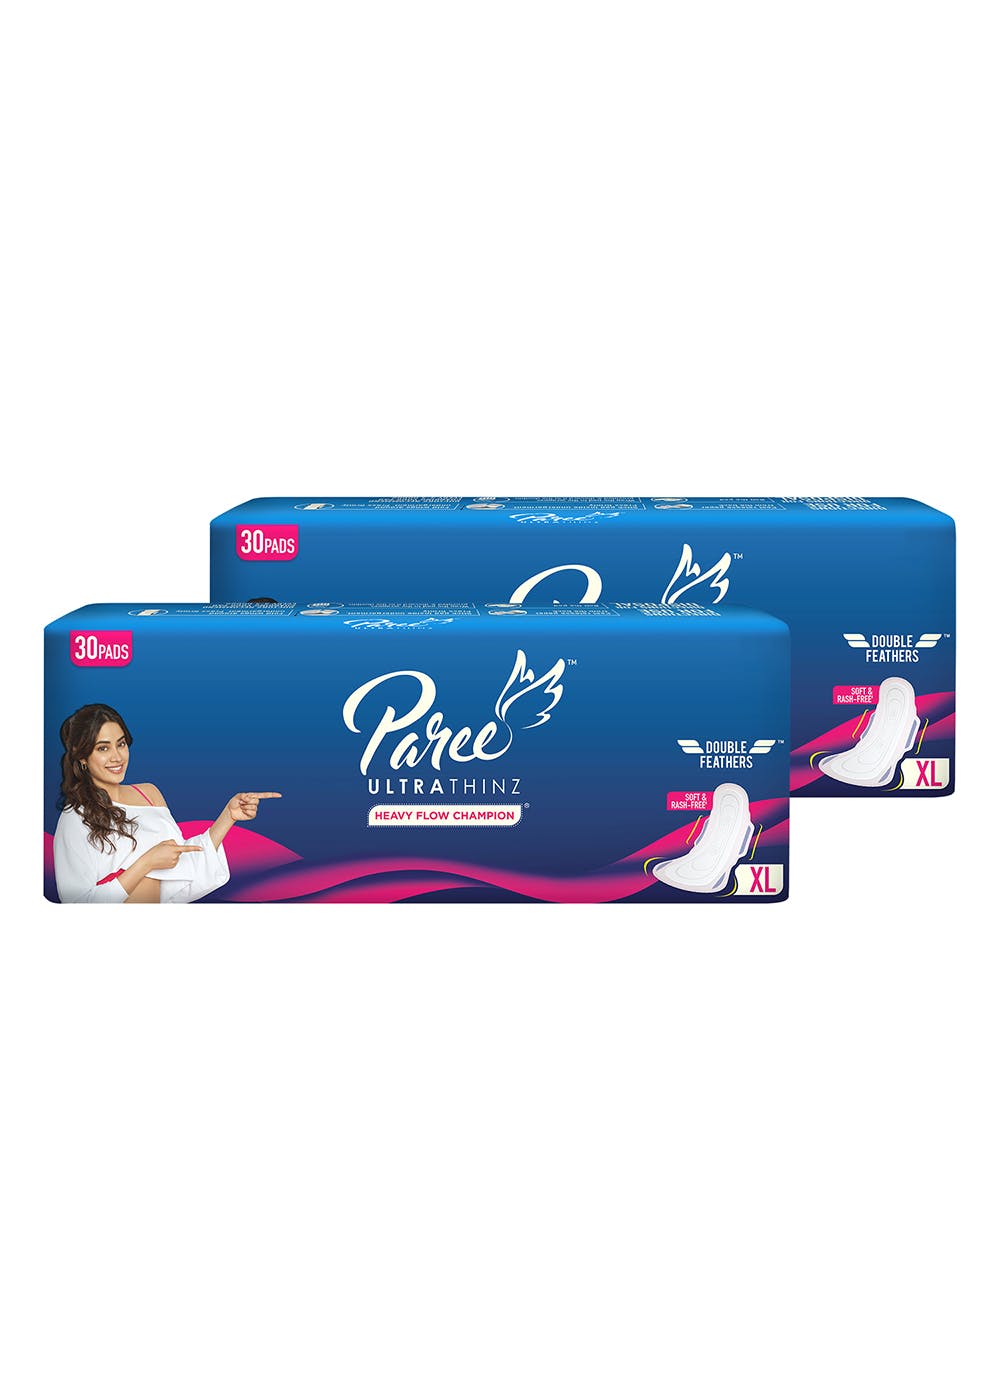 Ultra Thinz 30 XL Soft Feel Sanitary Pads with Frangrance (Tri-Fold)- Combo of 2